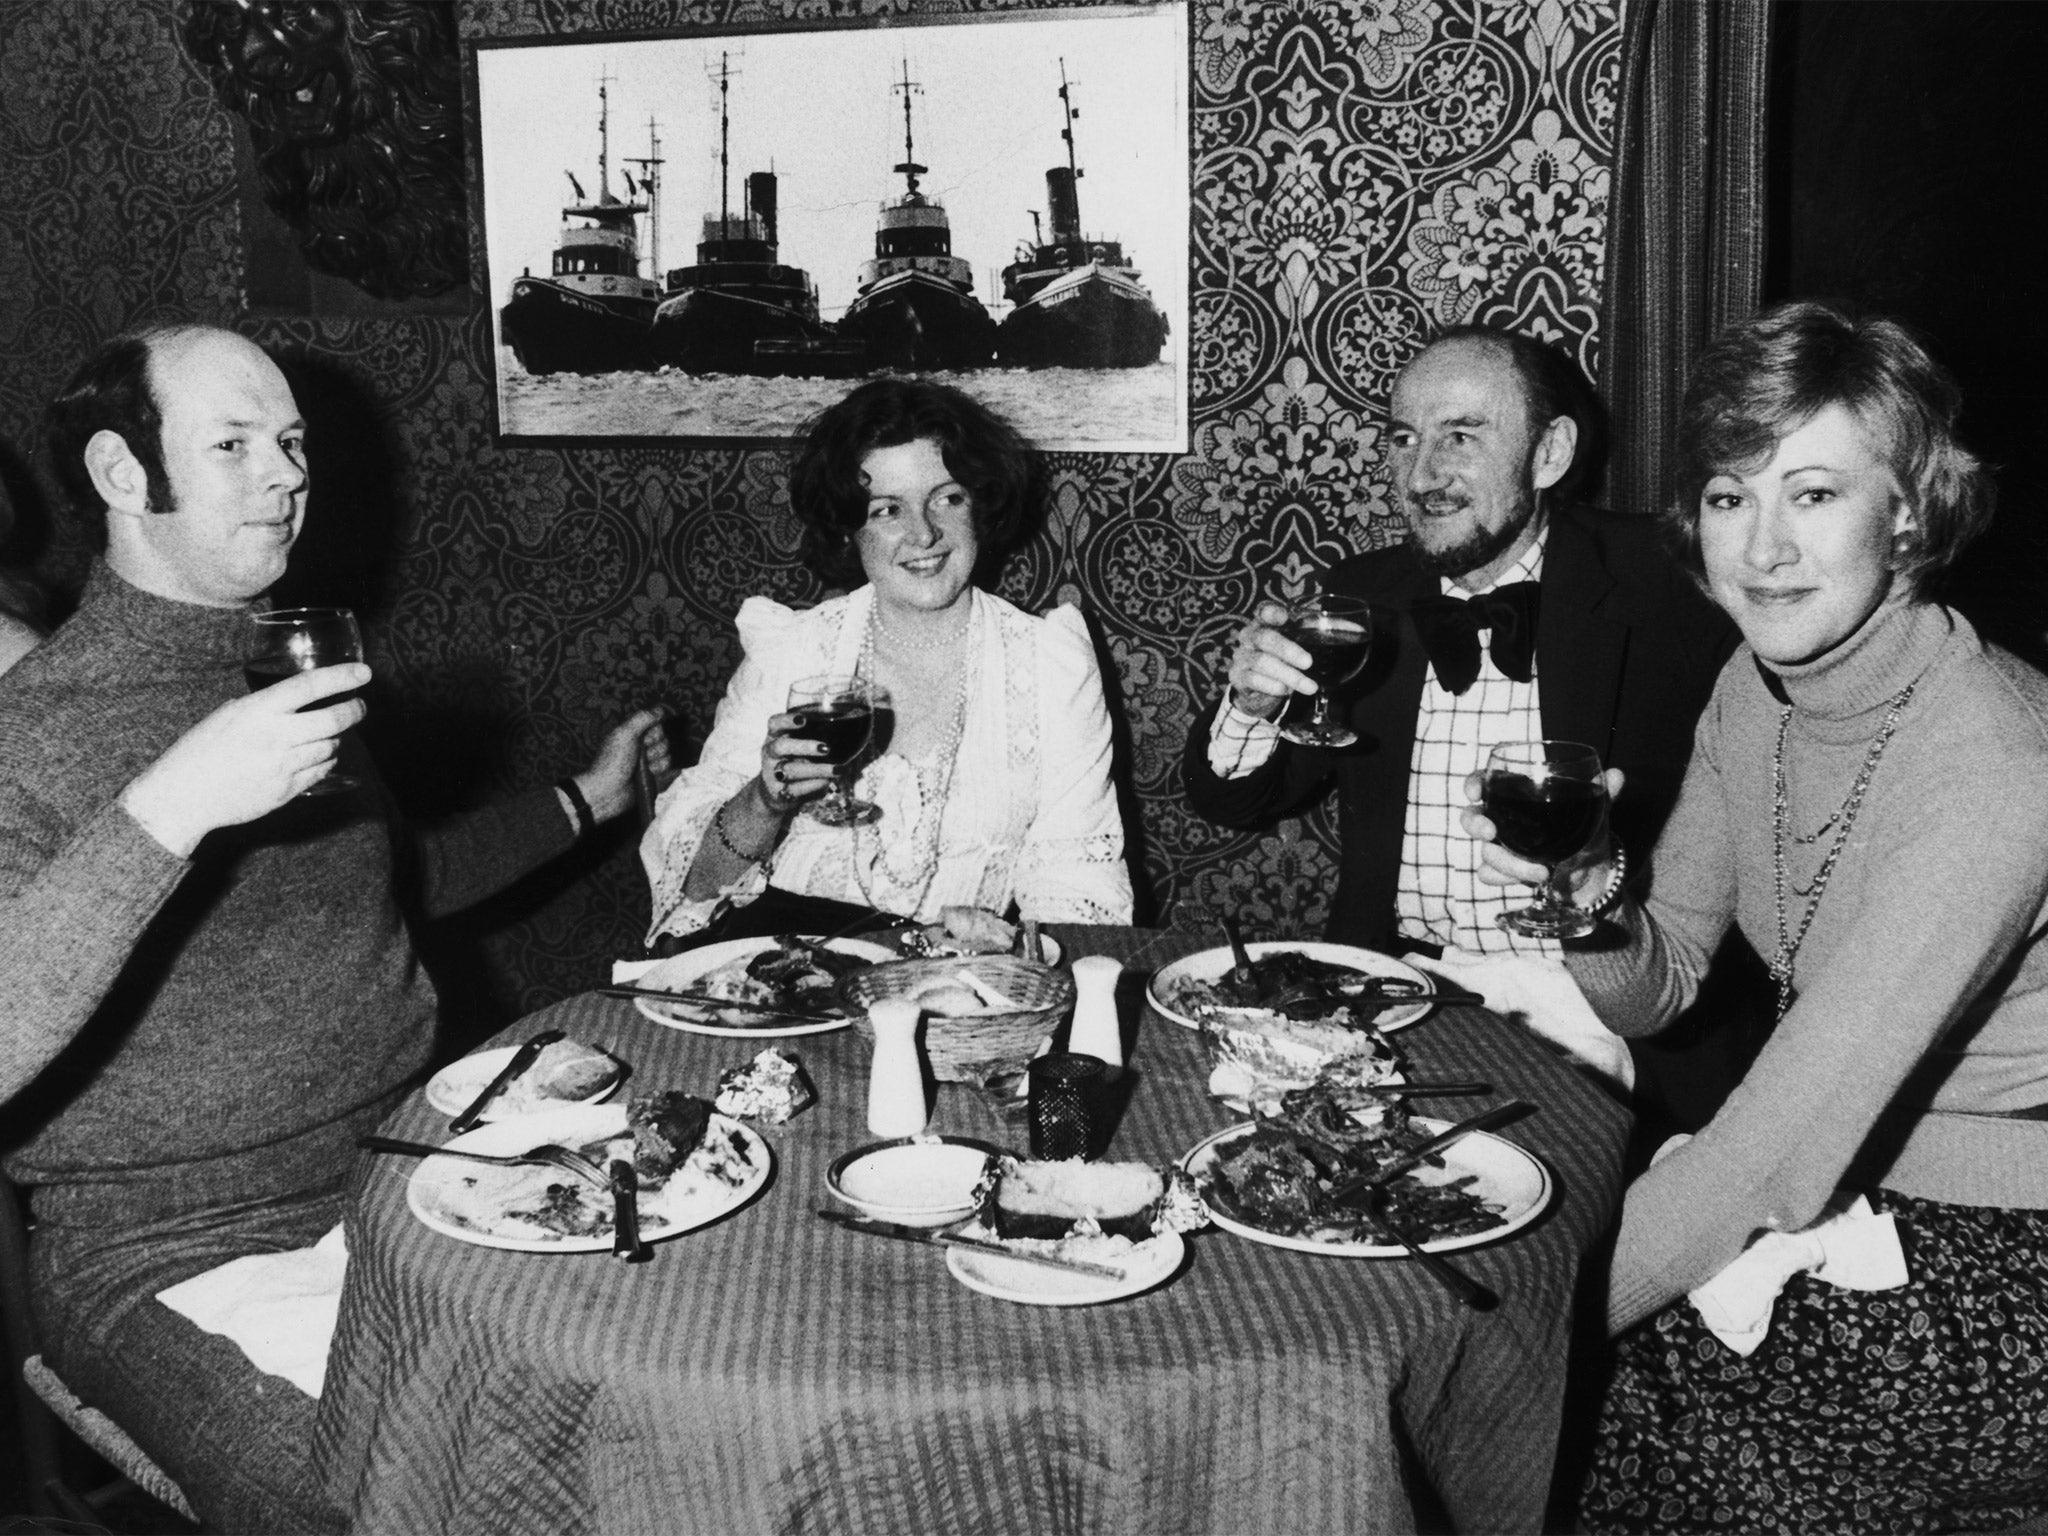 Timeshift: Spicing Up Britain looked at the country's post-war restaurant revolution